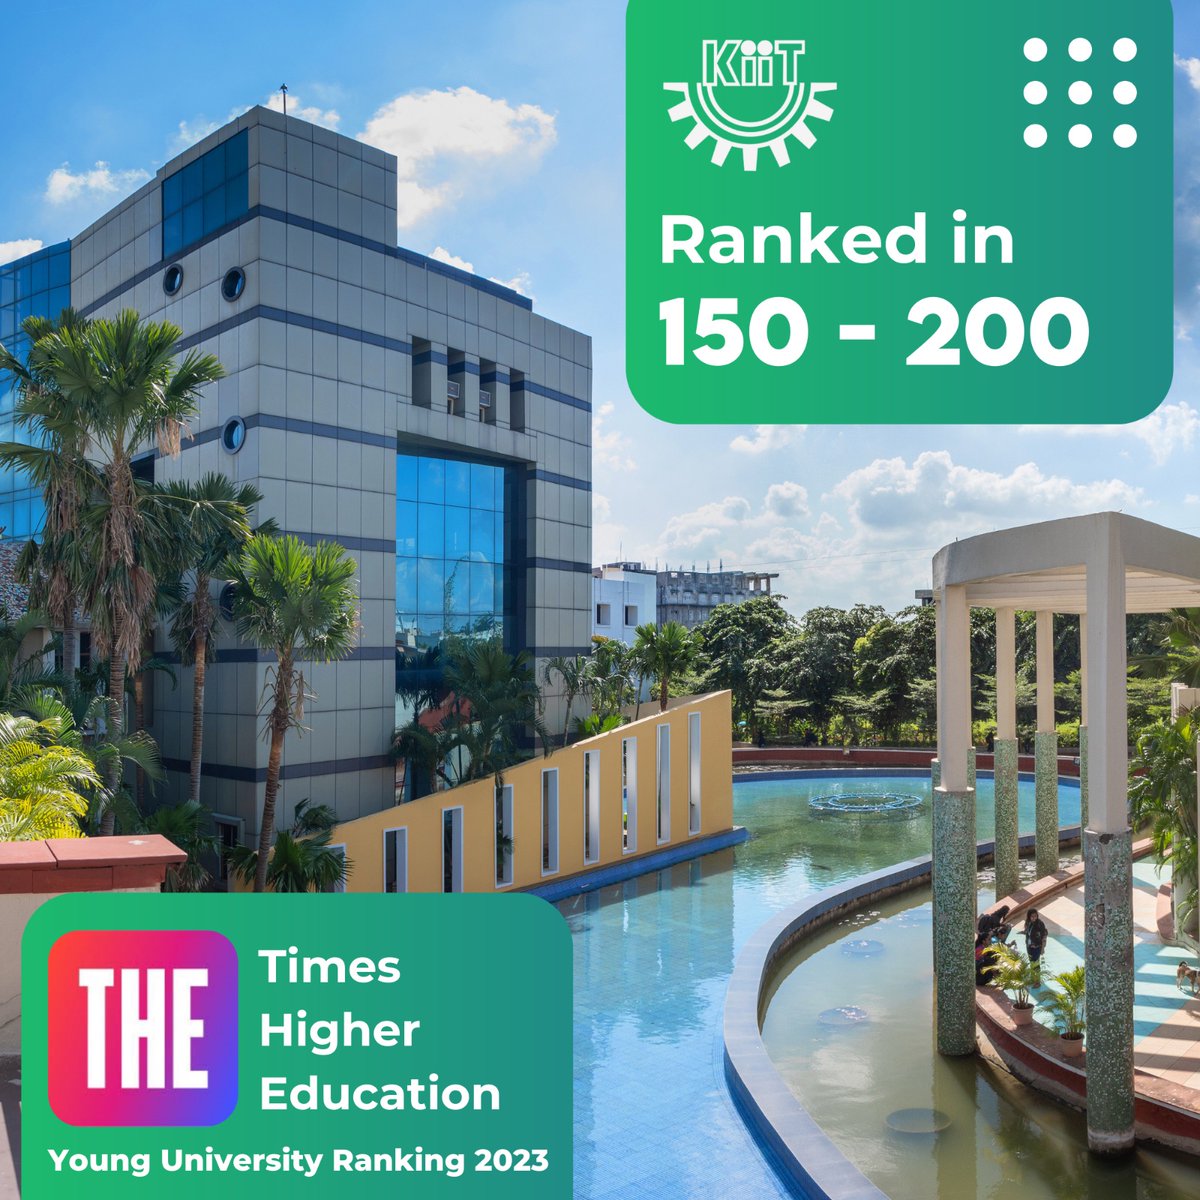 KIIT shines in the Times Higher Education Young University Rankings 2023!

KIIT  has once again proven it's strong academic base by achieving a great ranking.  

#ksombbsr #kiit #TimesHigherEducation #university #rankings #bestcollege #lifeatkiit #kiitian #bbsr #odisha